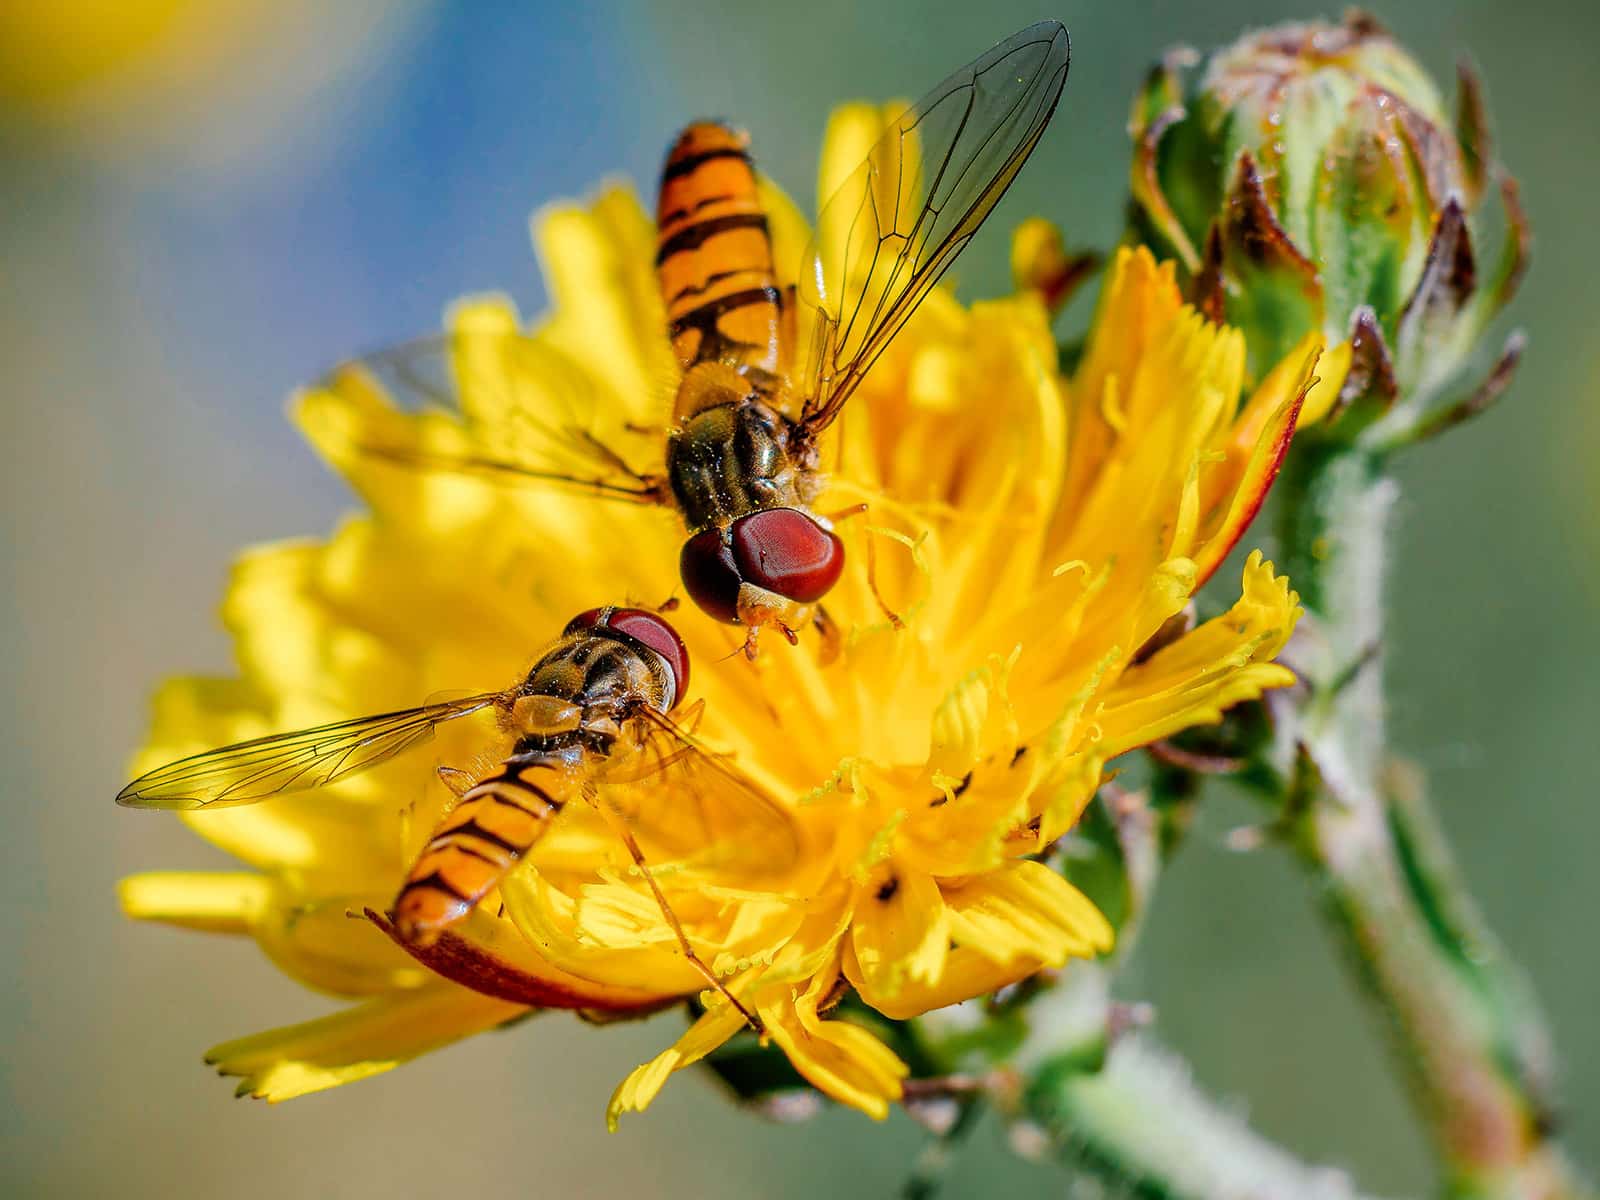 Two syrphid flies (hoverflies) feeding on nectar and pollen from a yellow flower